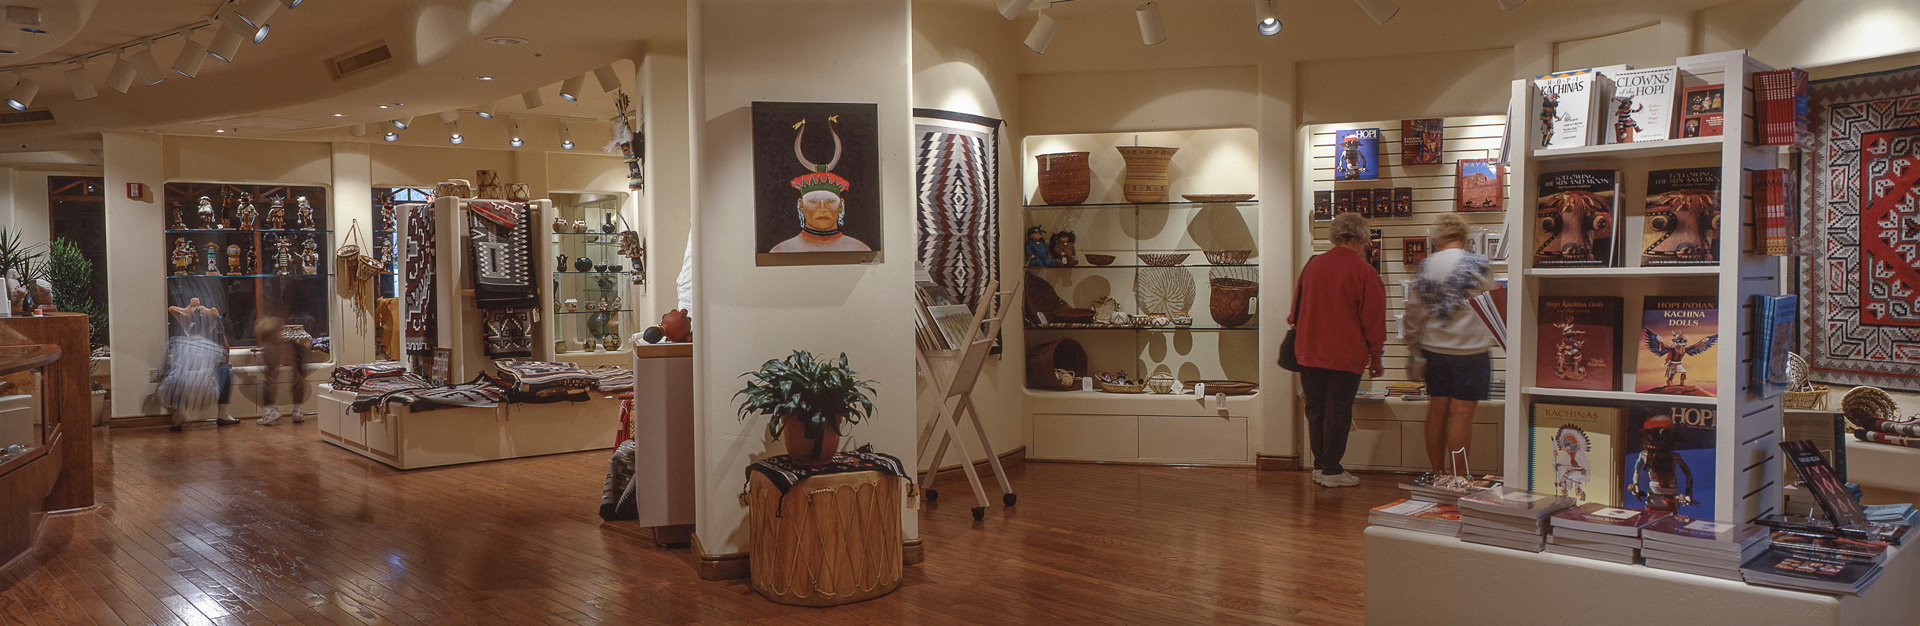 A landscape photo of a store with American Indian products and books.